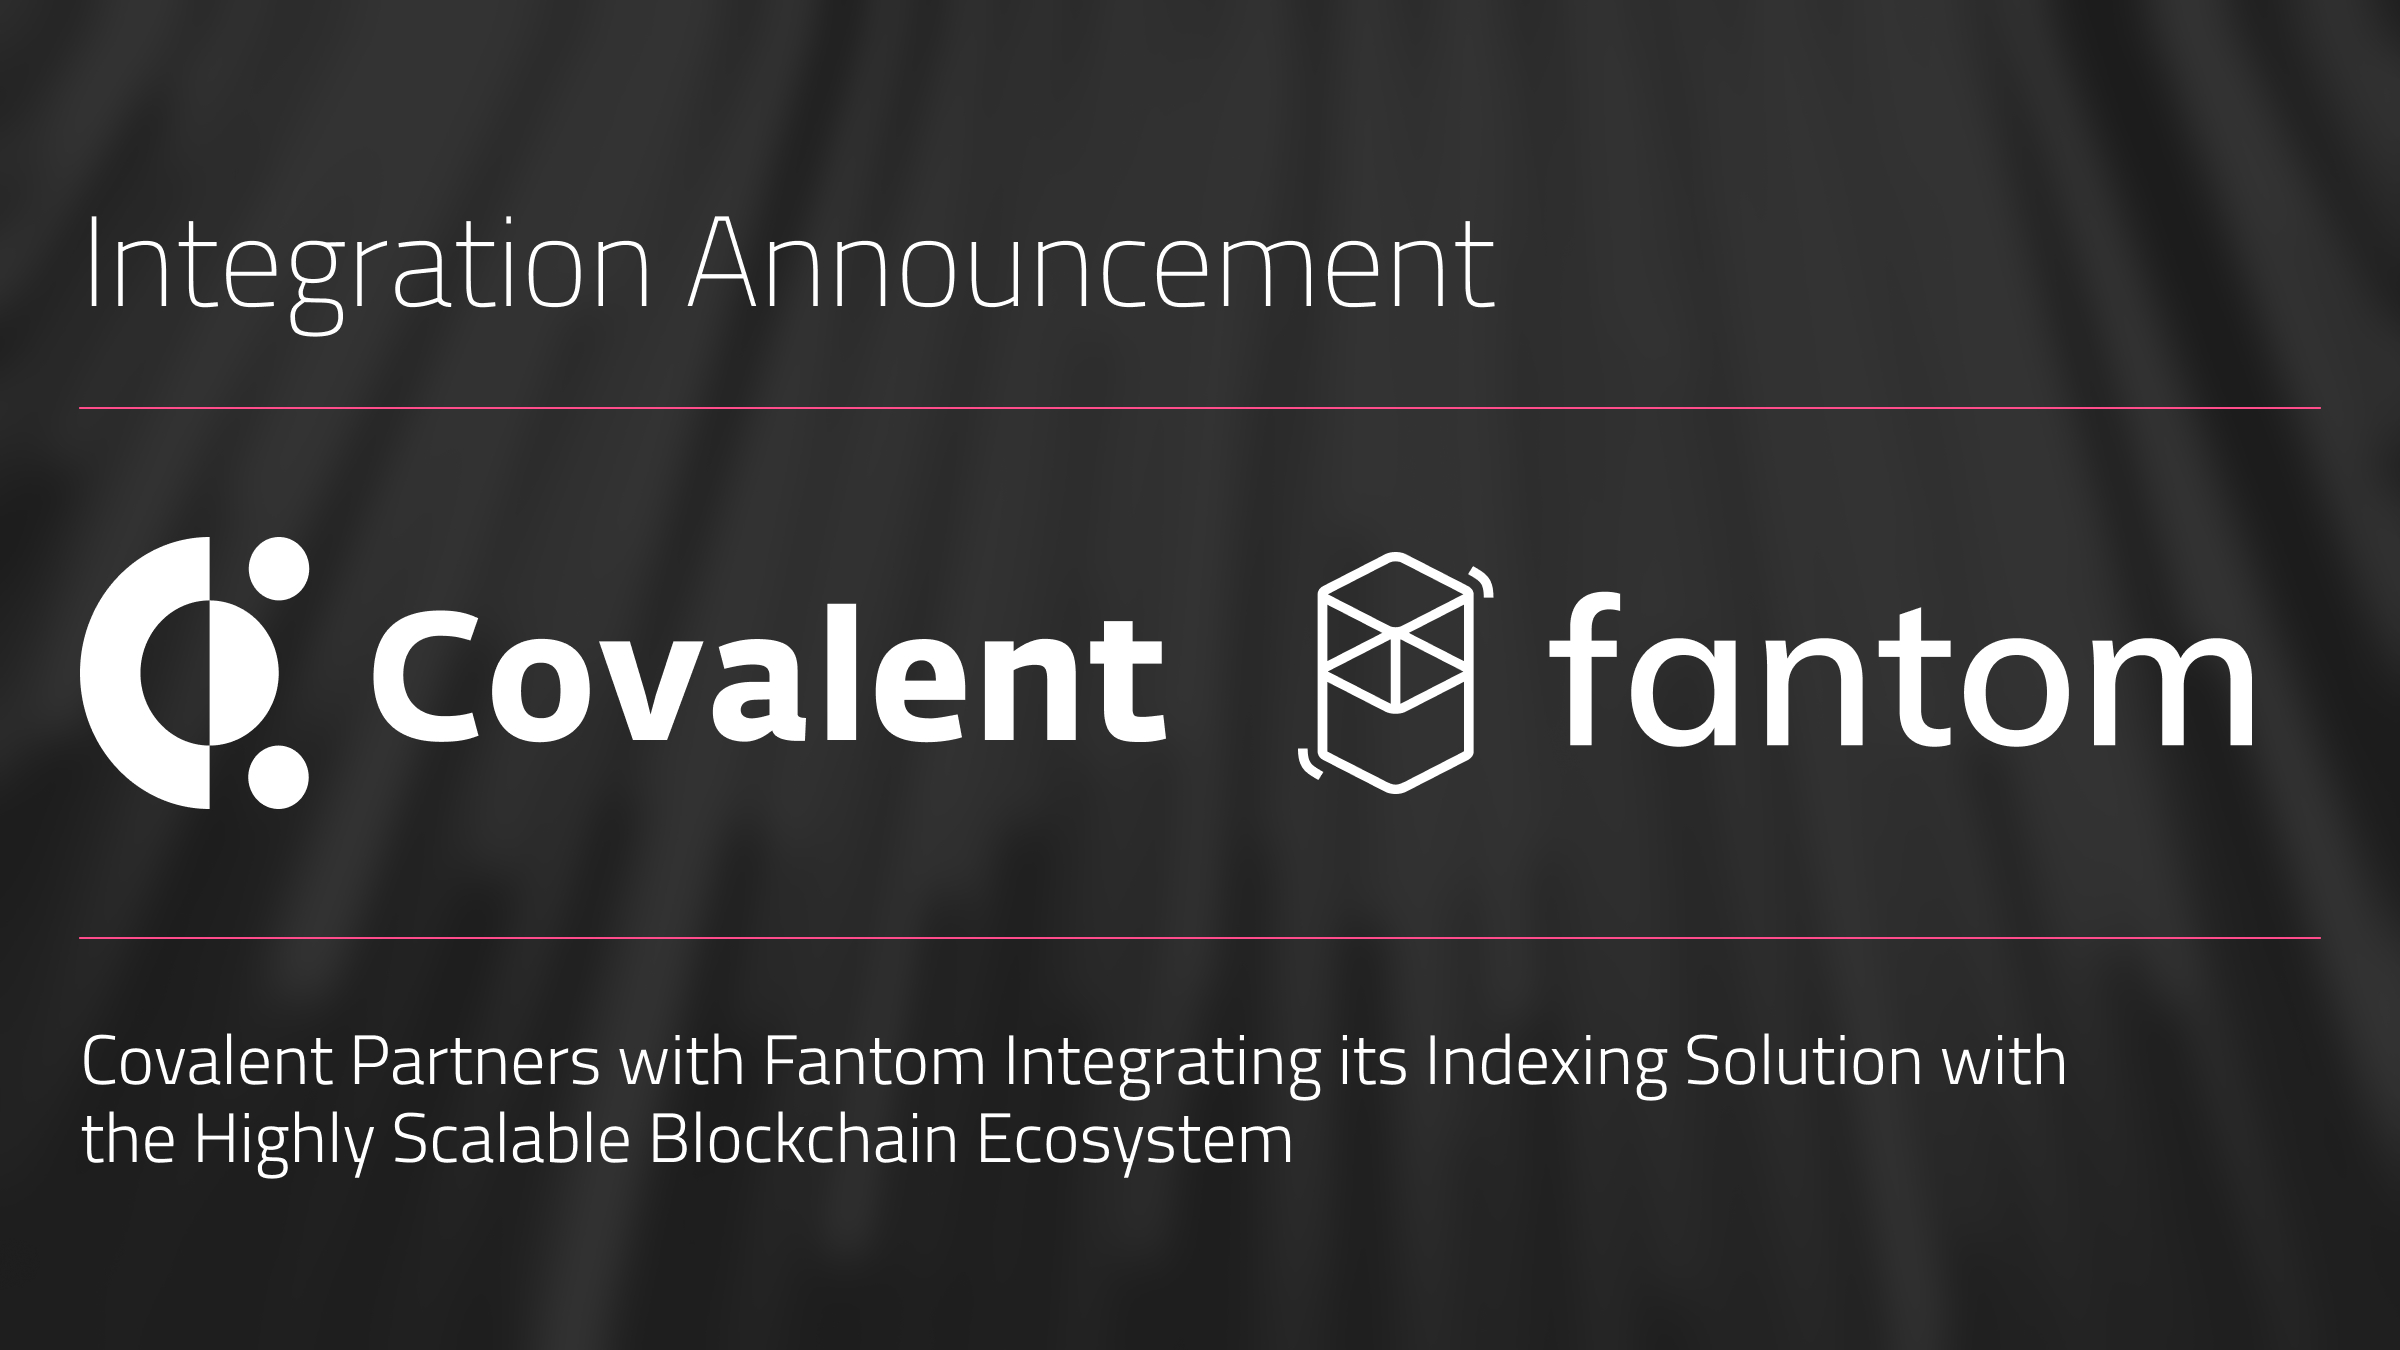 Covalent Partners with Fantom Integrating its Indexing Solution with the Highly Scalable Blockchain Ecosystem